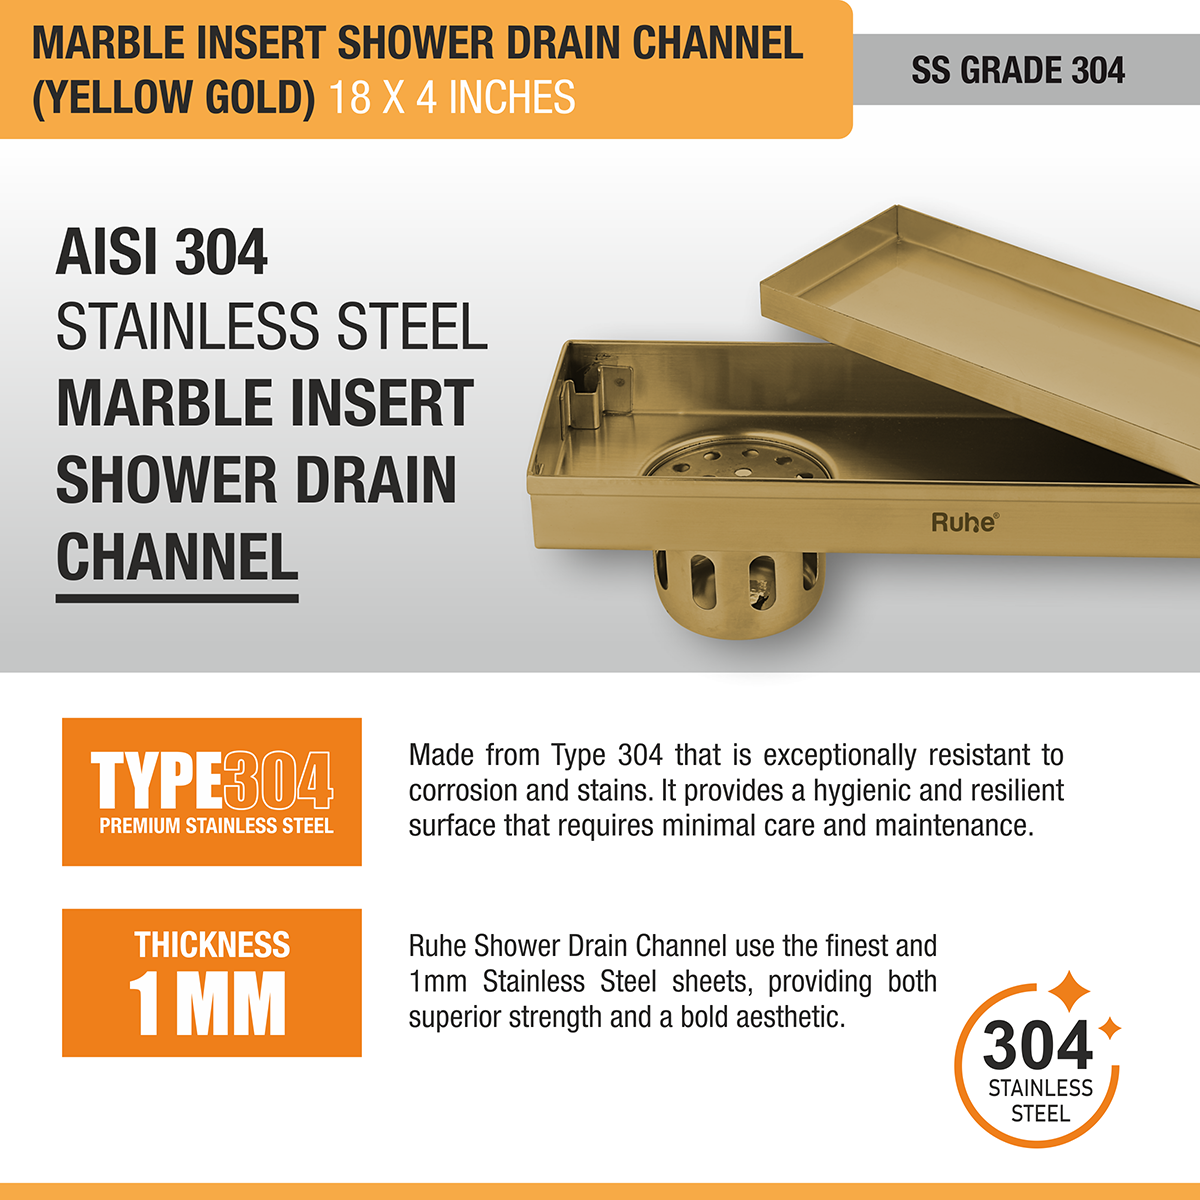 Marble Insert Shower Drain Channel (18 x 4 Inches) YELLOW GOLD PVD Coated stainless steel